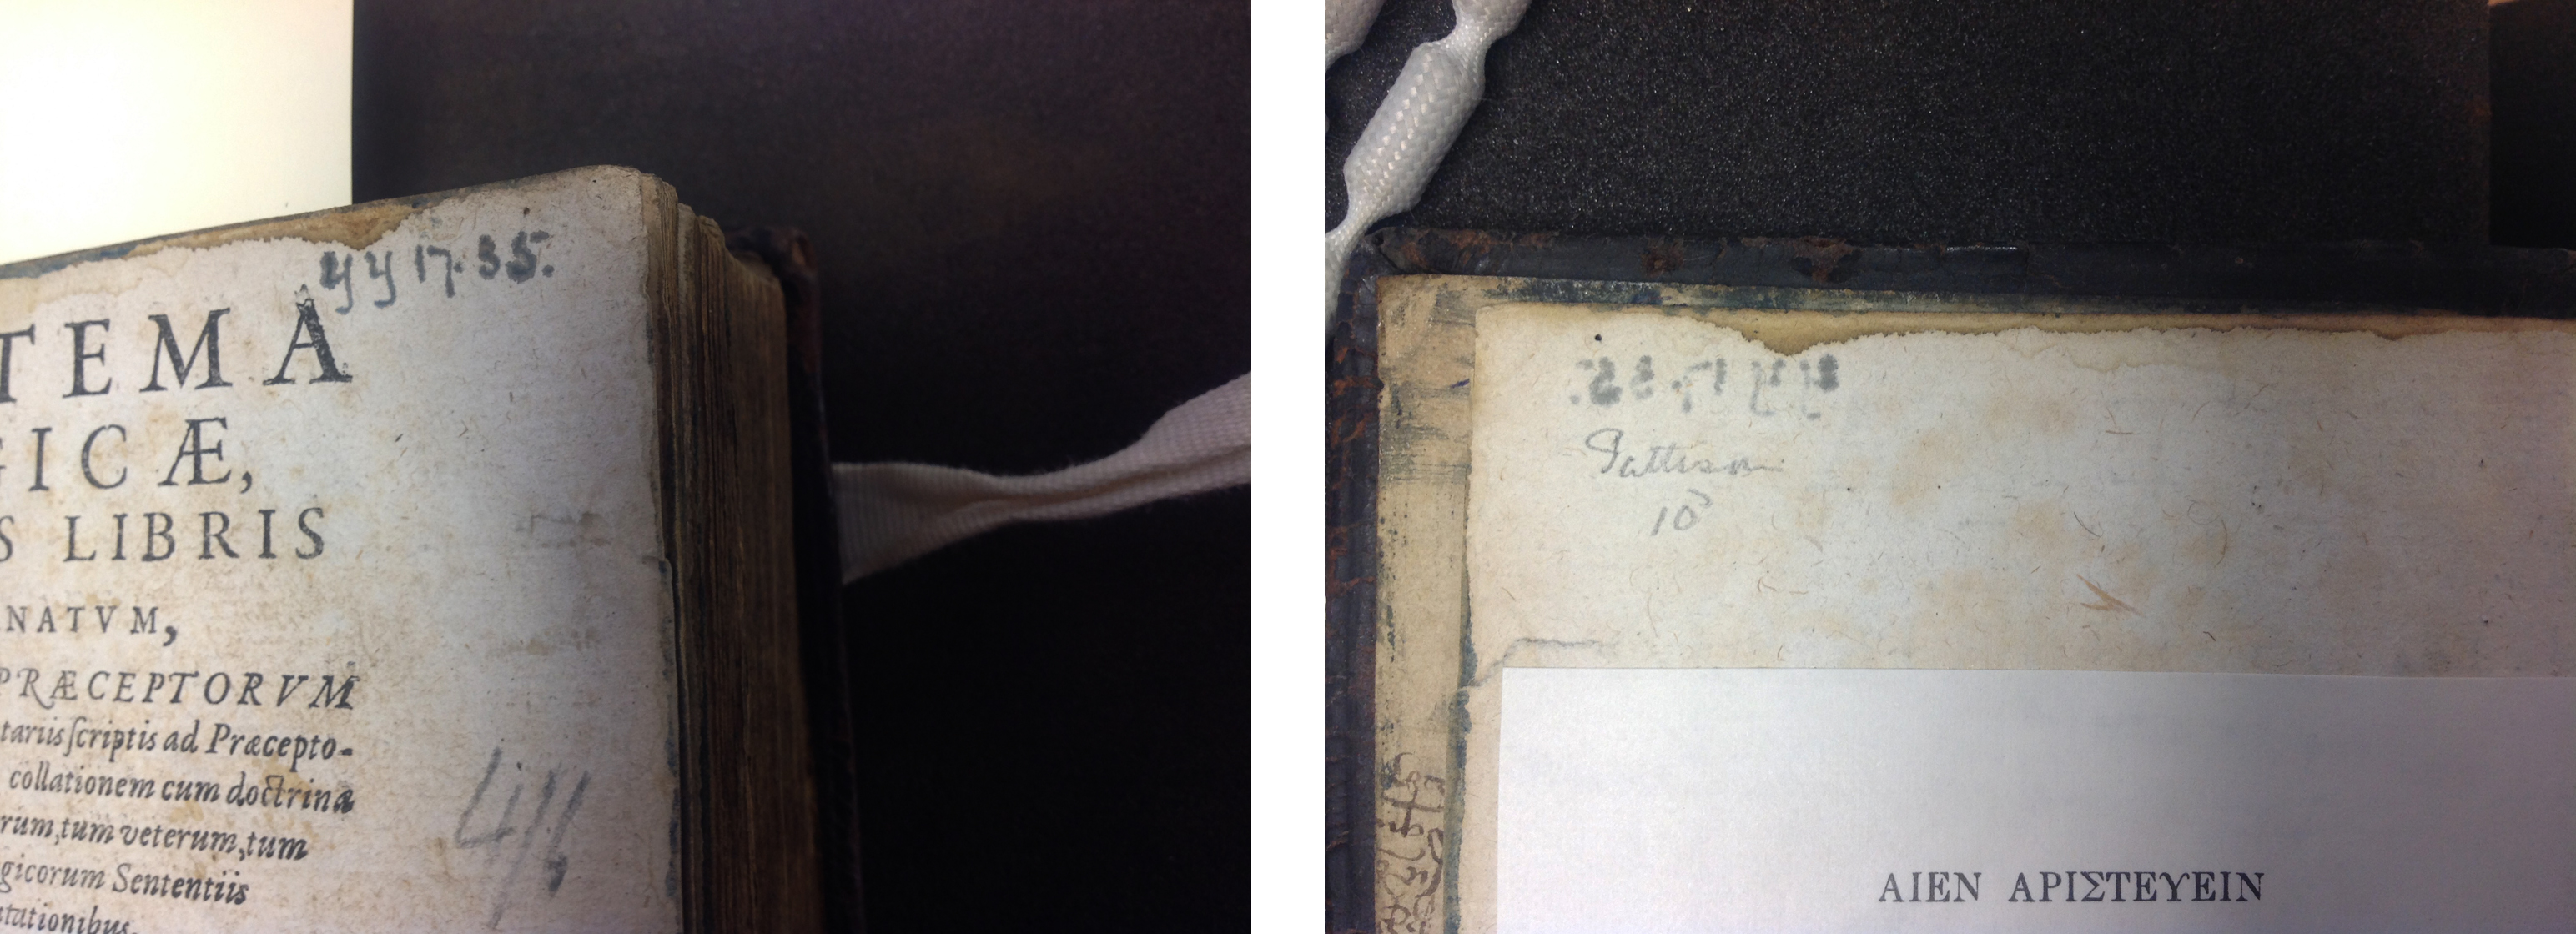 Two marks of provenance leading to the identification that this book was also in the collection of Mark Pattison, dean of St Paul's: a pressmark (left) and a record of price paid at the sale of his library (right)